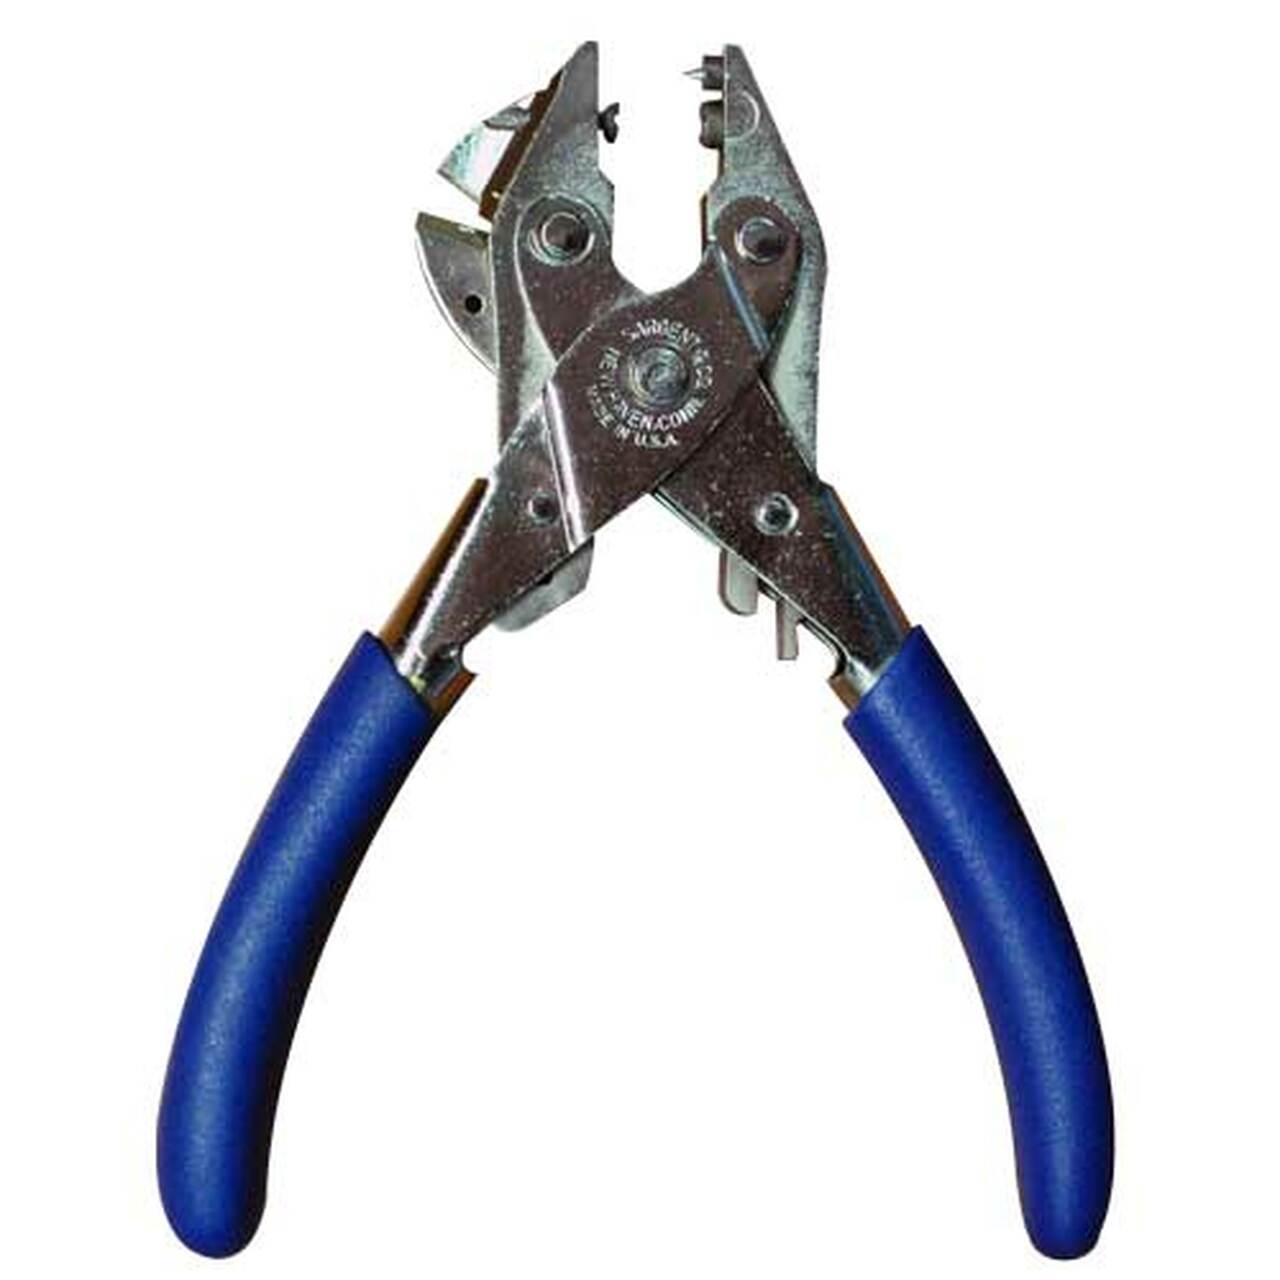 #10 Combination Pliers with Cutting Tool - Alan Richard Textiles, LTD #10 Metal Control Chain, Chain & Control Cords